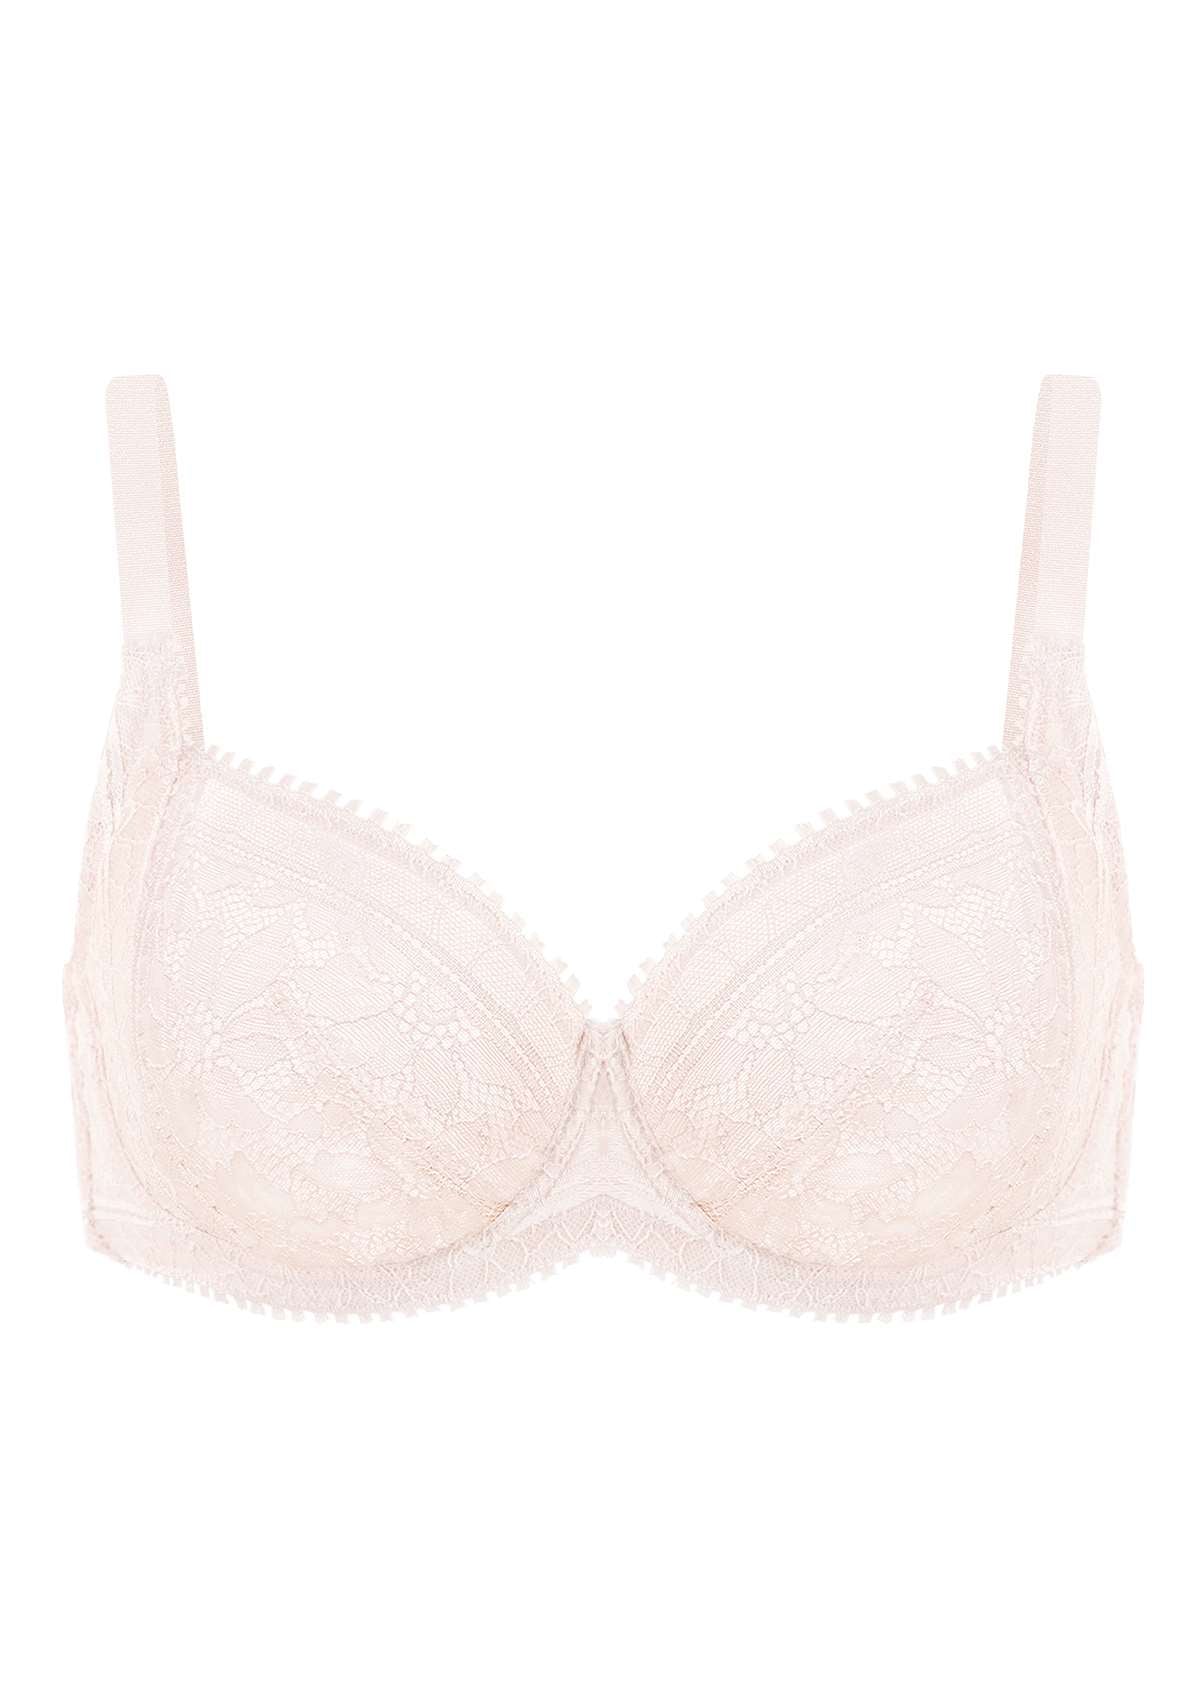 HSIA Silene Floral Delicate Unlined Lace Soft Cup Uplift Bra - Heavenly Pink / 38 / DD/E